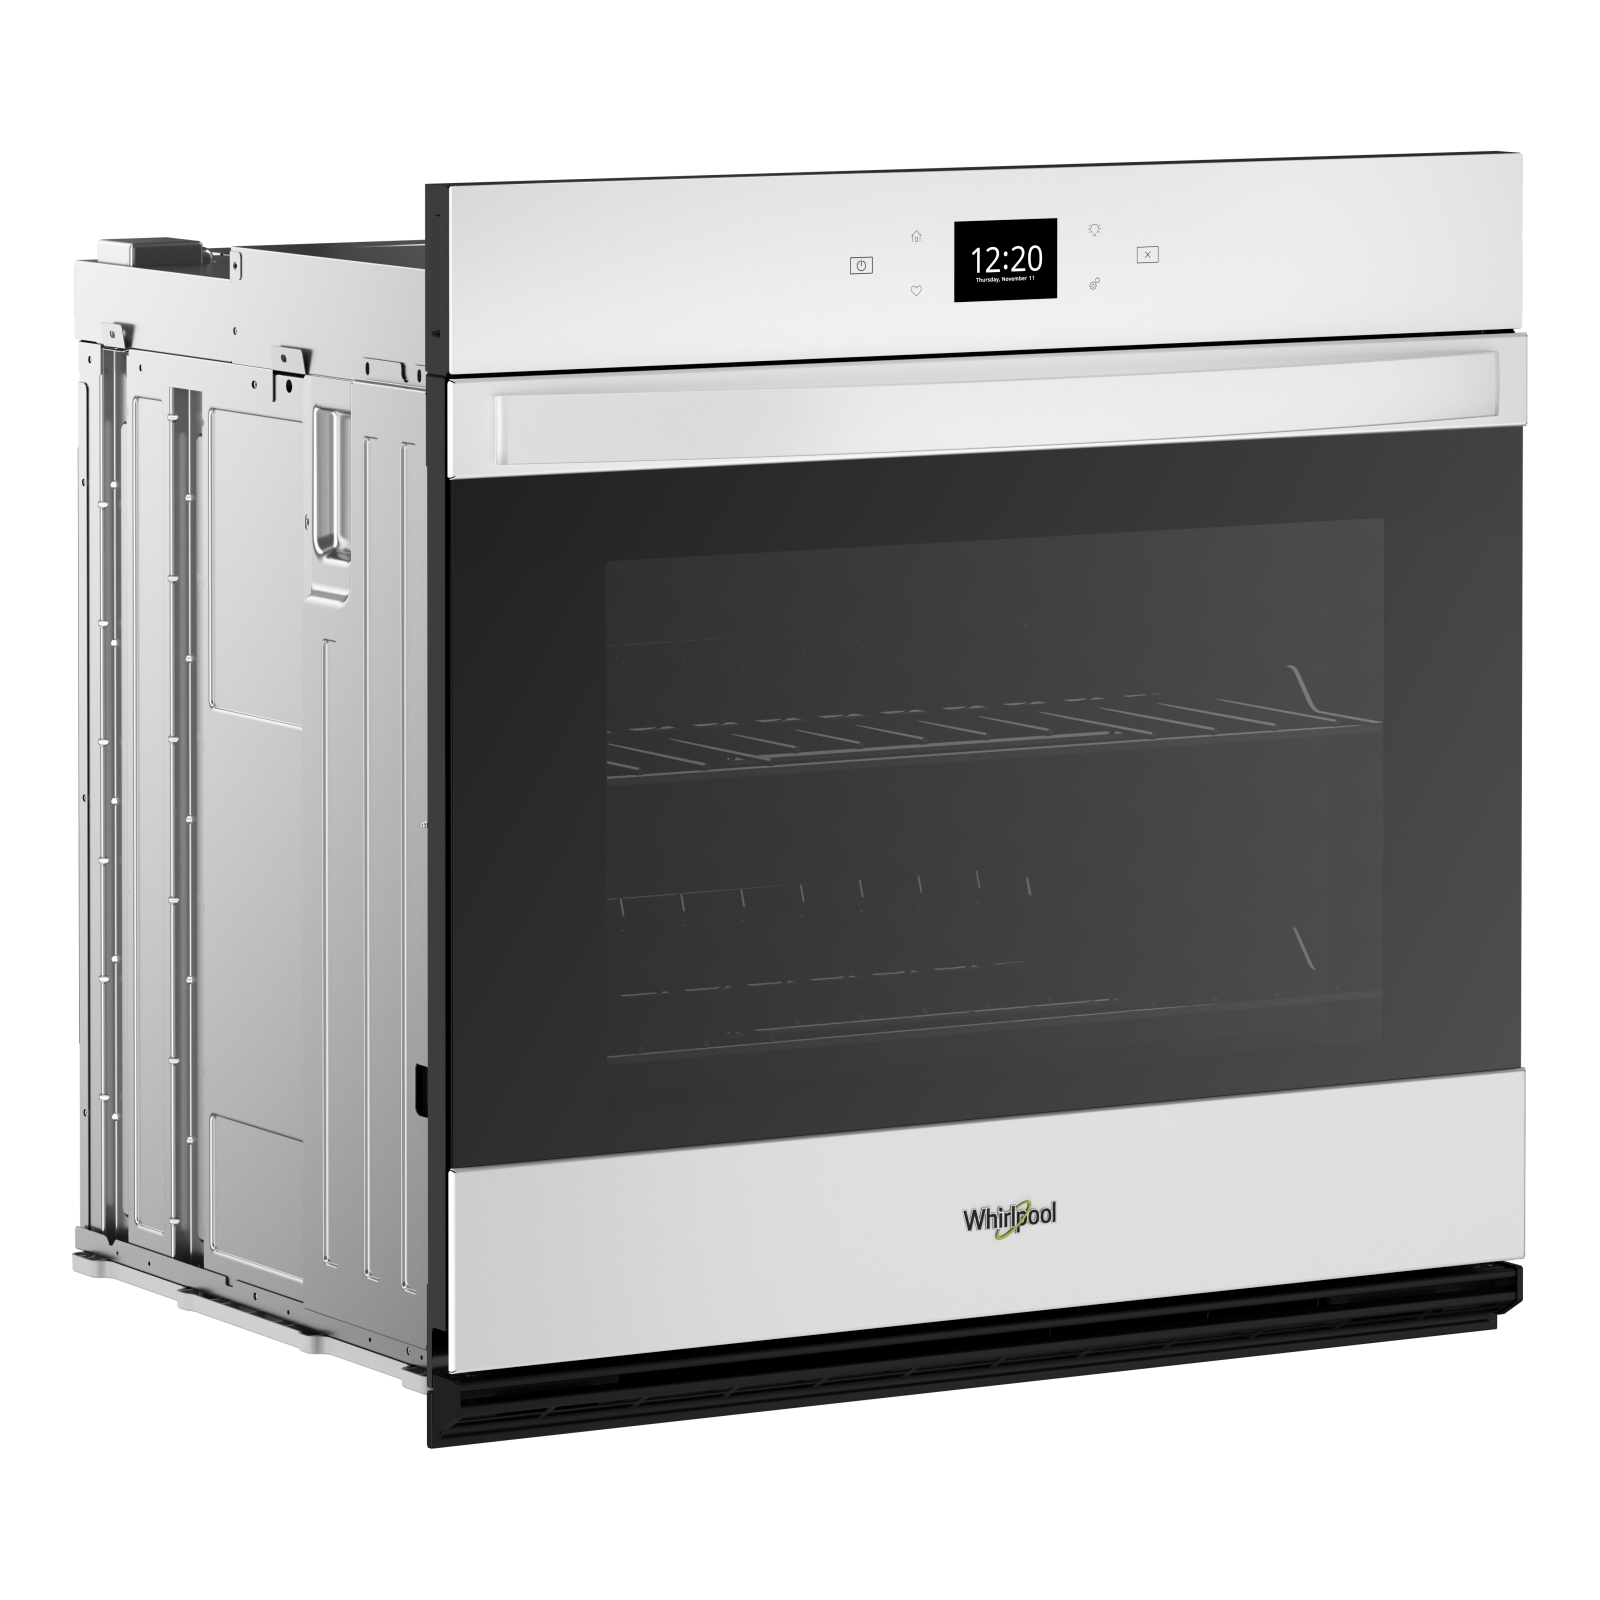 Whirlpool - 4.3 cu. ft Single Wall Oven in White - WOES5027LW